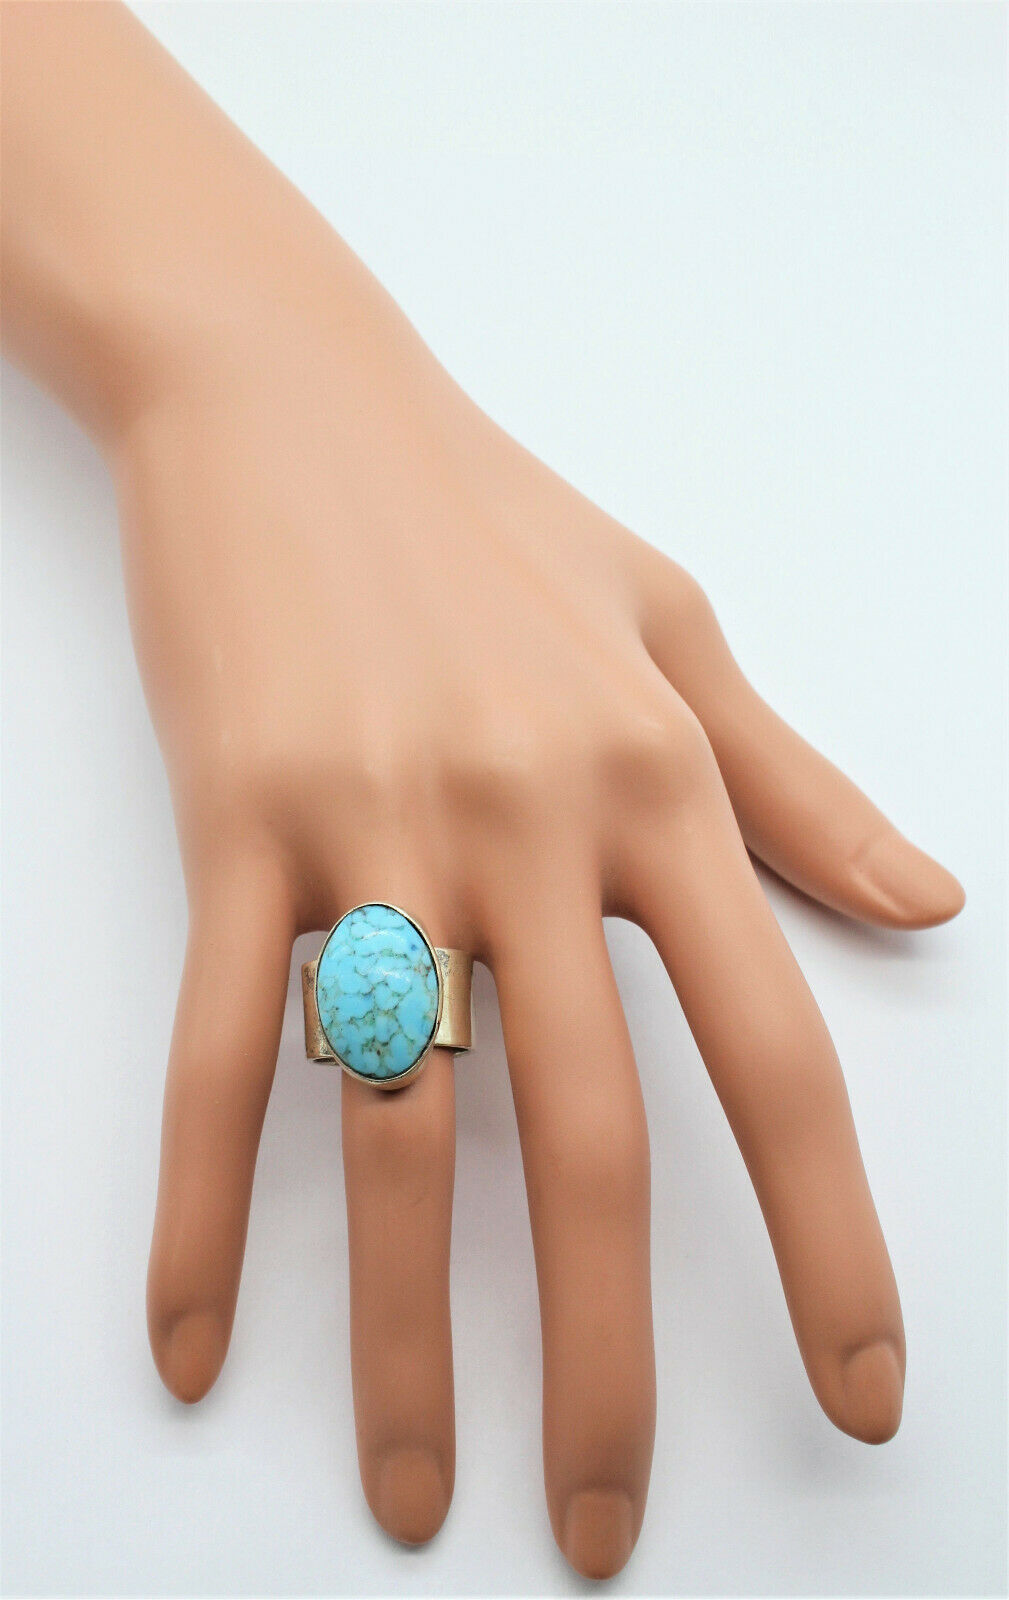 Vintage Sterling Silver Large Mounting Mexico Turquoise Ring, Size 8.5 - 13.6g